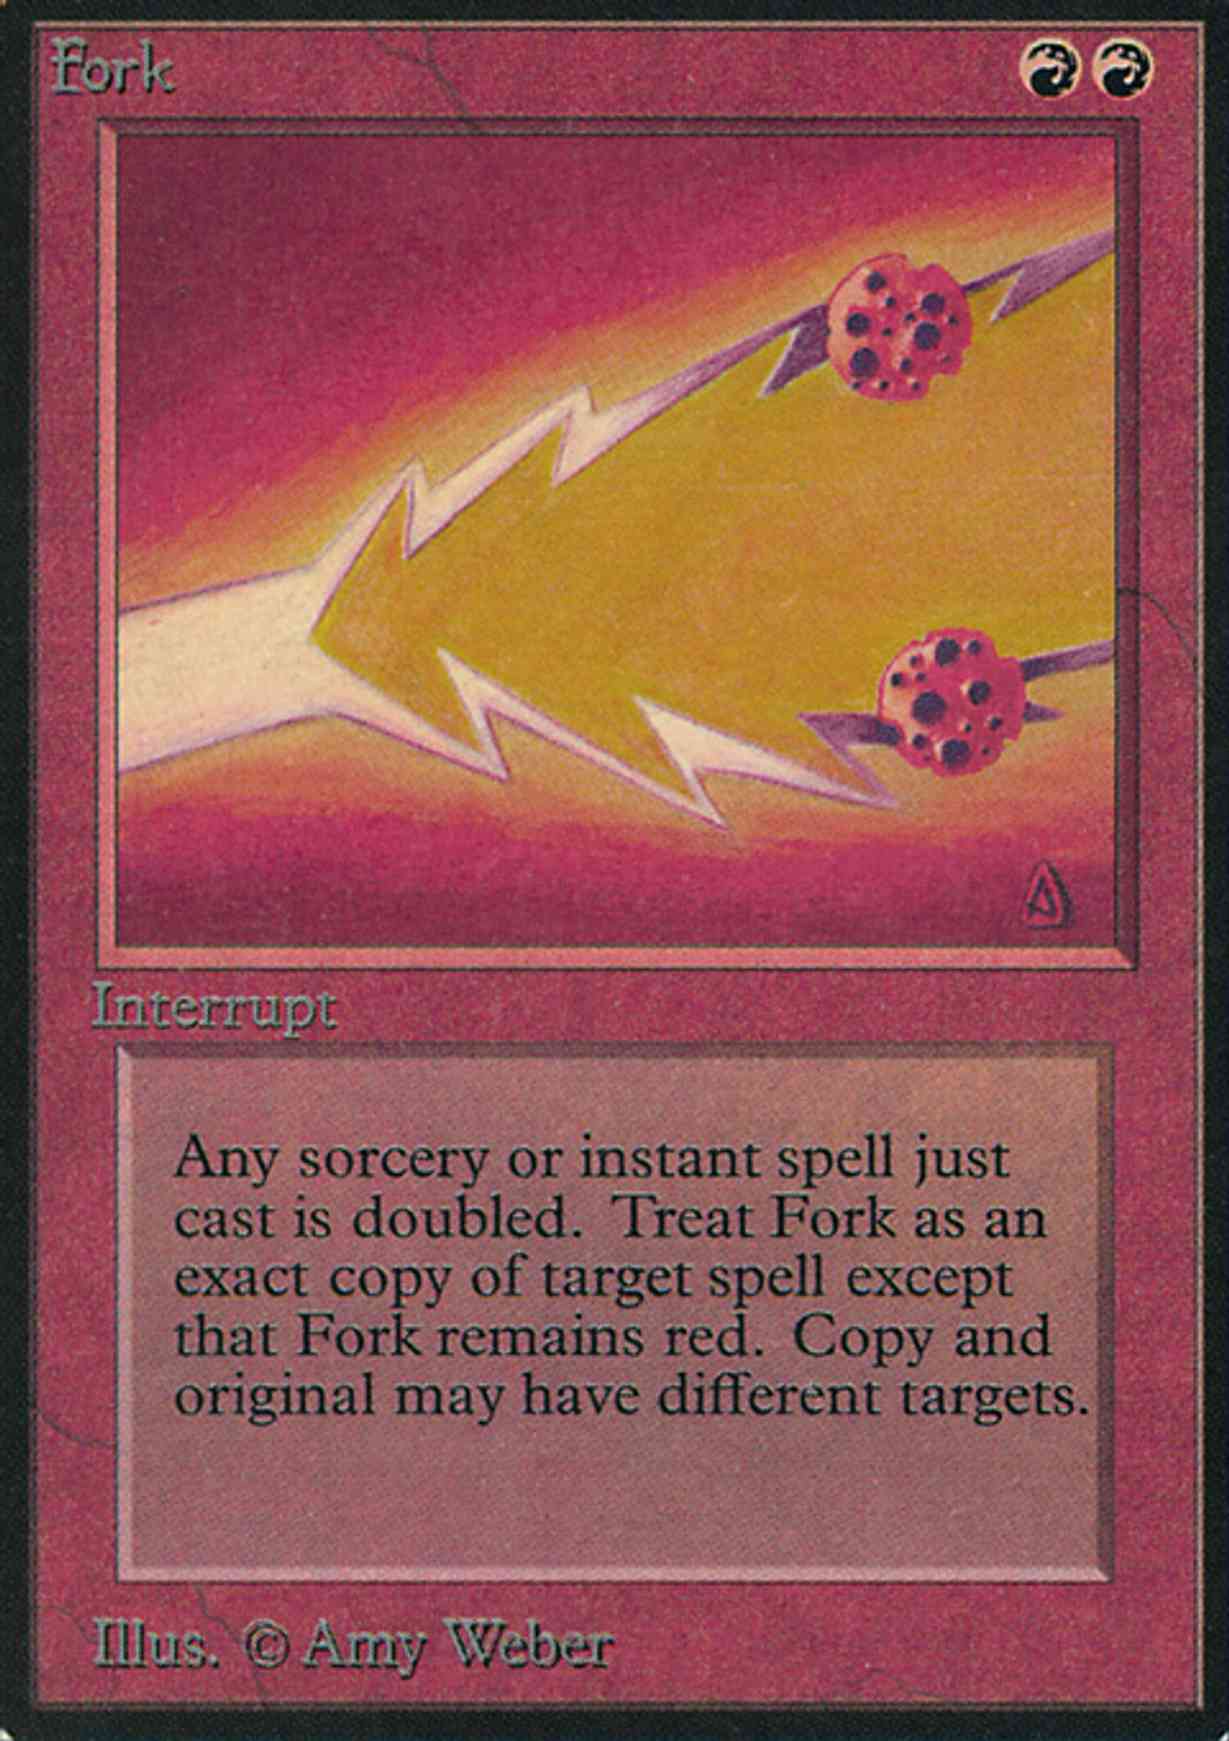 Fork magic card front